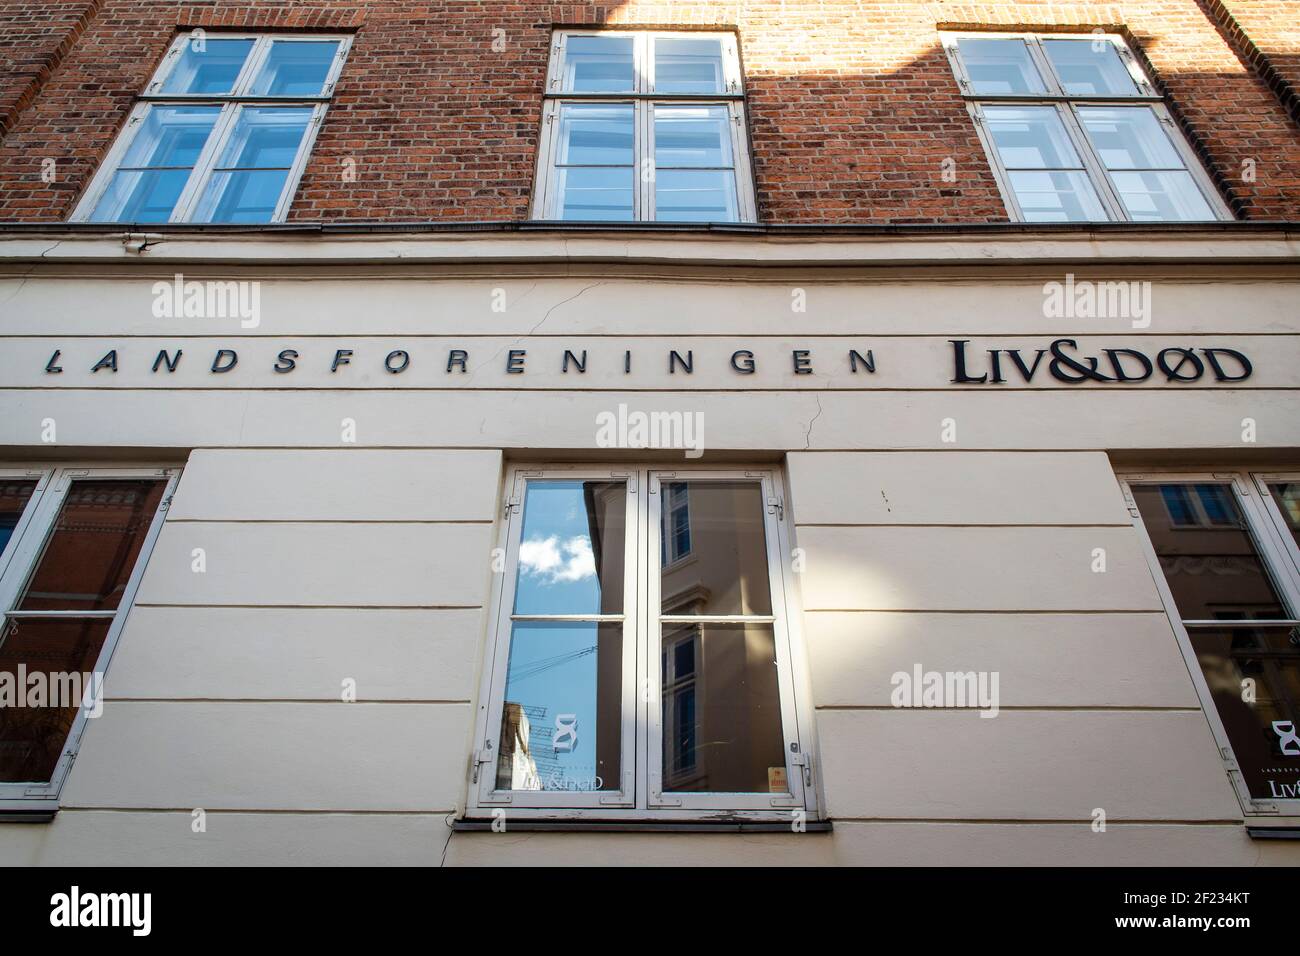 The National Association for Life & Death (Landsforeningen Liv & Død) in Copenhagen is a humanitarian, non-profit organization. Their purpose is to wo Stock Photo